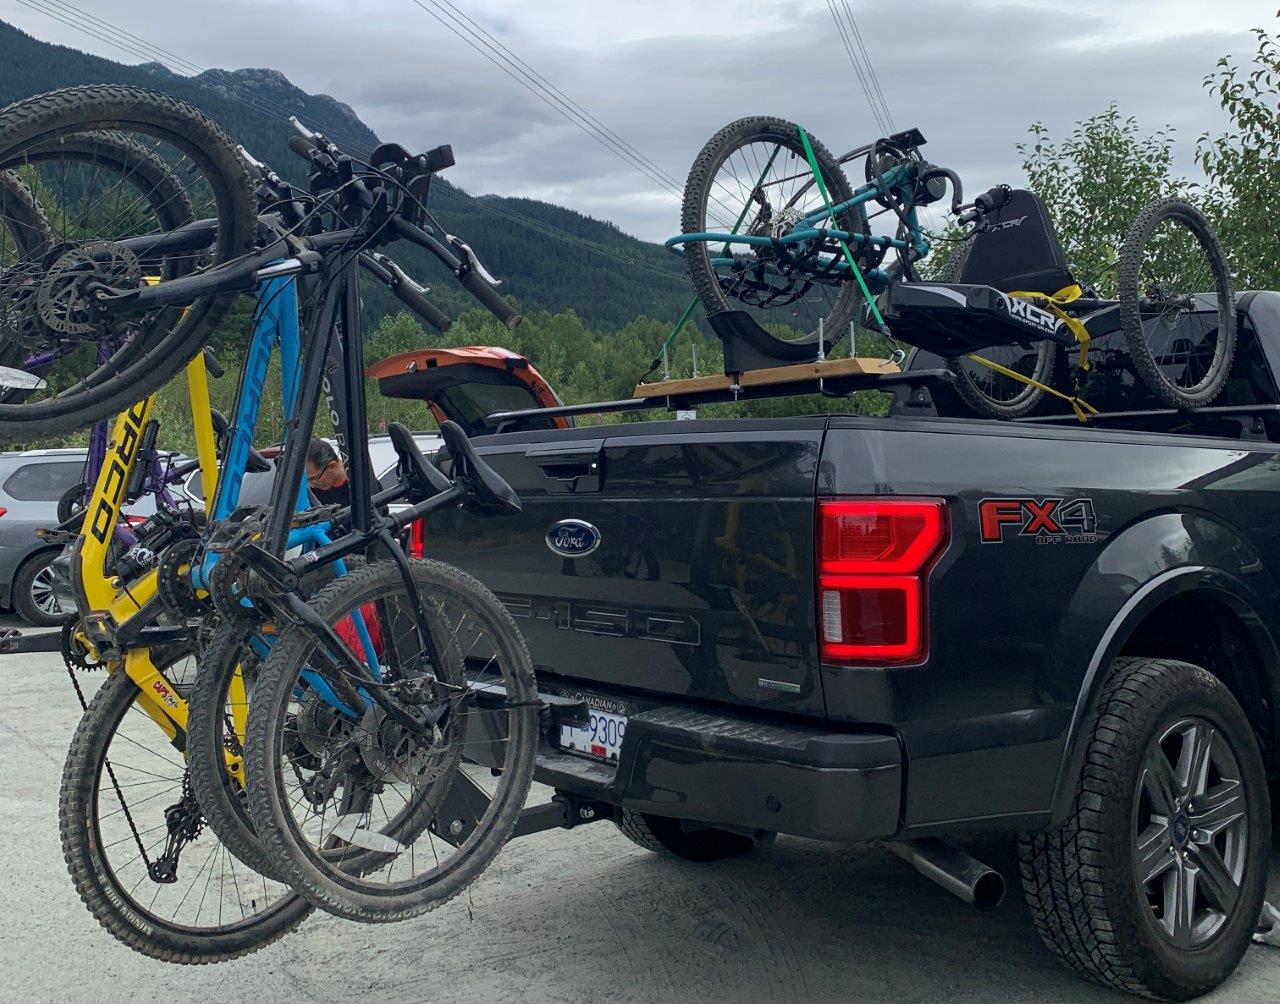 Load up the Mountain Bikes! We're Going Biking in Whistler - Photo Codi Darnell